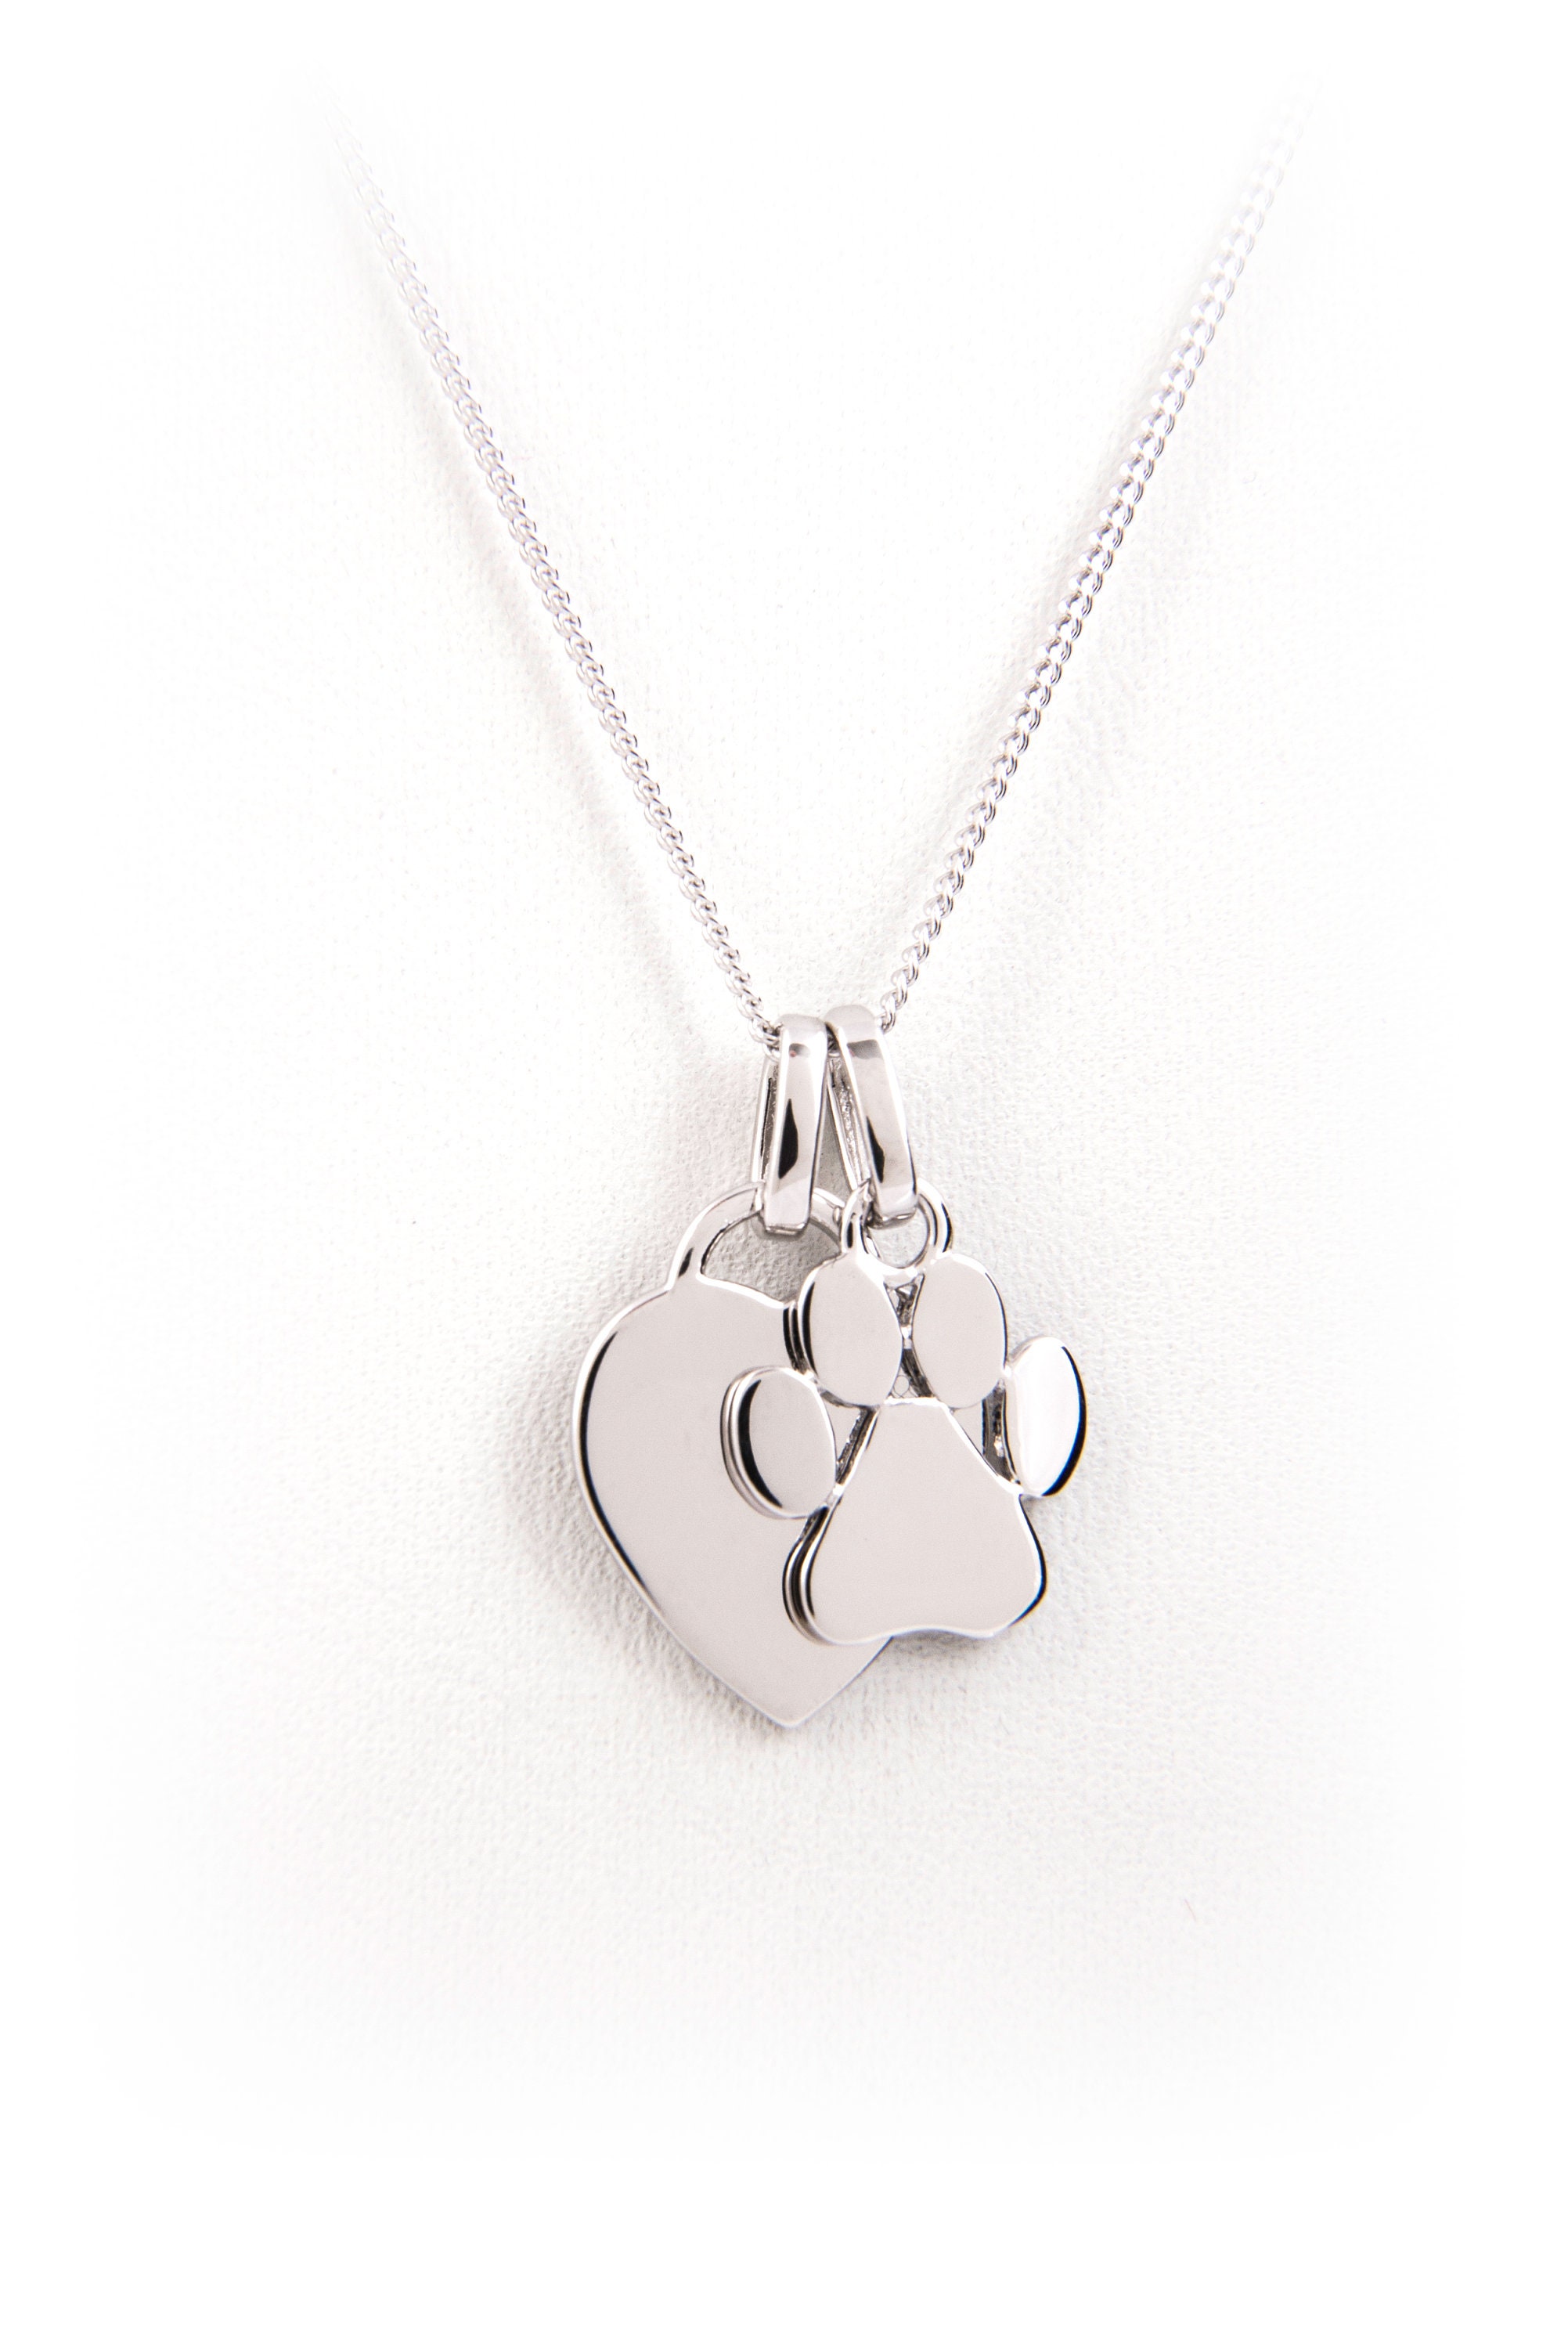 Paw Print Heart Necklace Sterling Silver Dog Lover Gift - Etsy